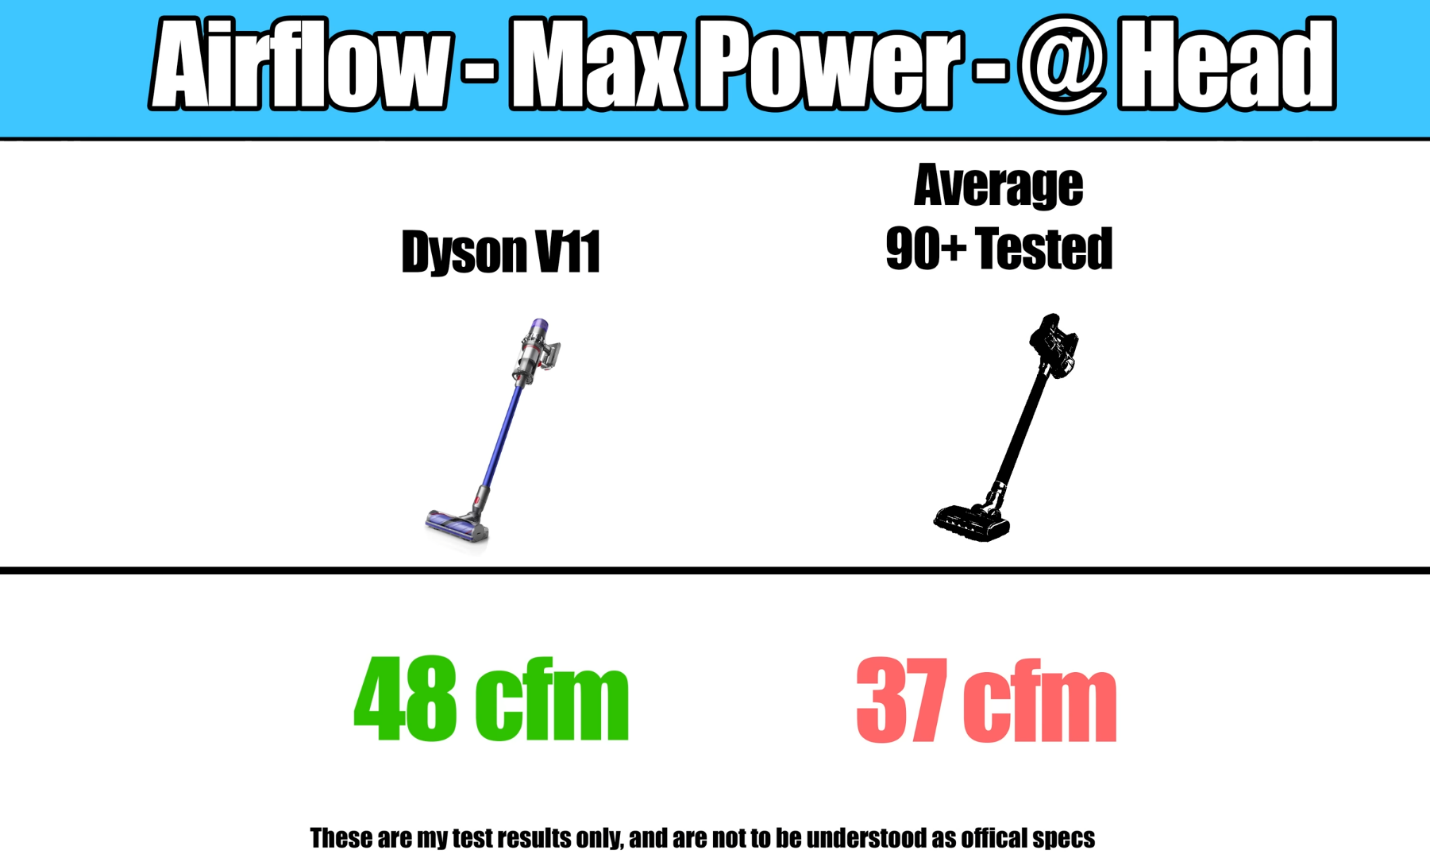 Graphic illustrating the Dyson V11's airflow measurement at 48 cfm, outperforming the average of 90+ tested vacuums at 37 cfm. 